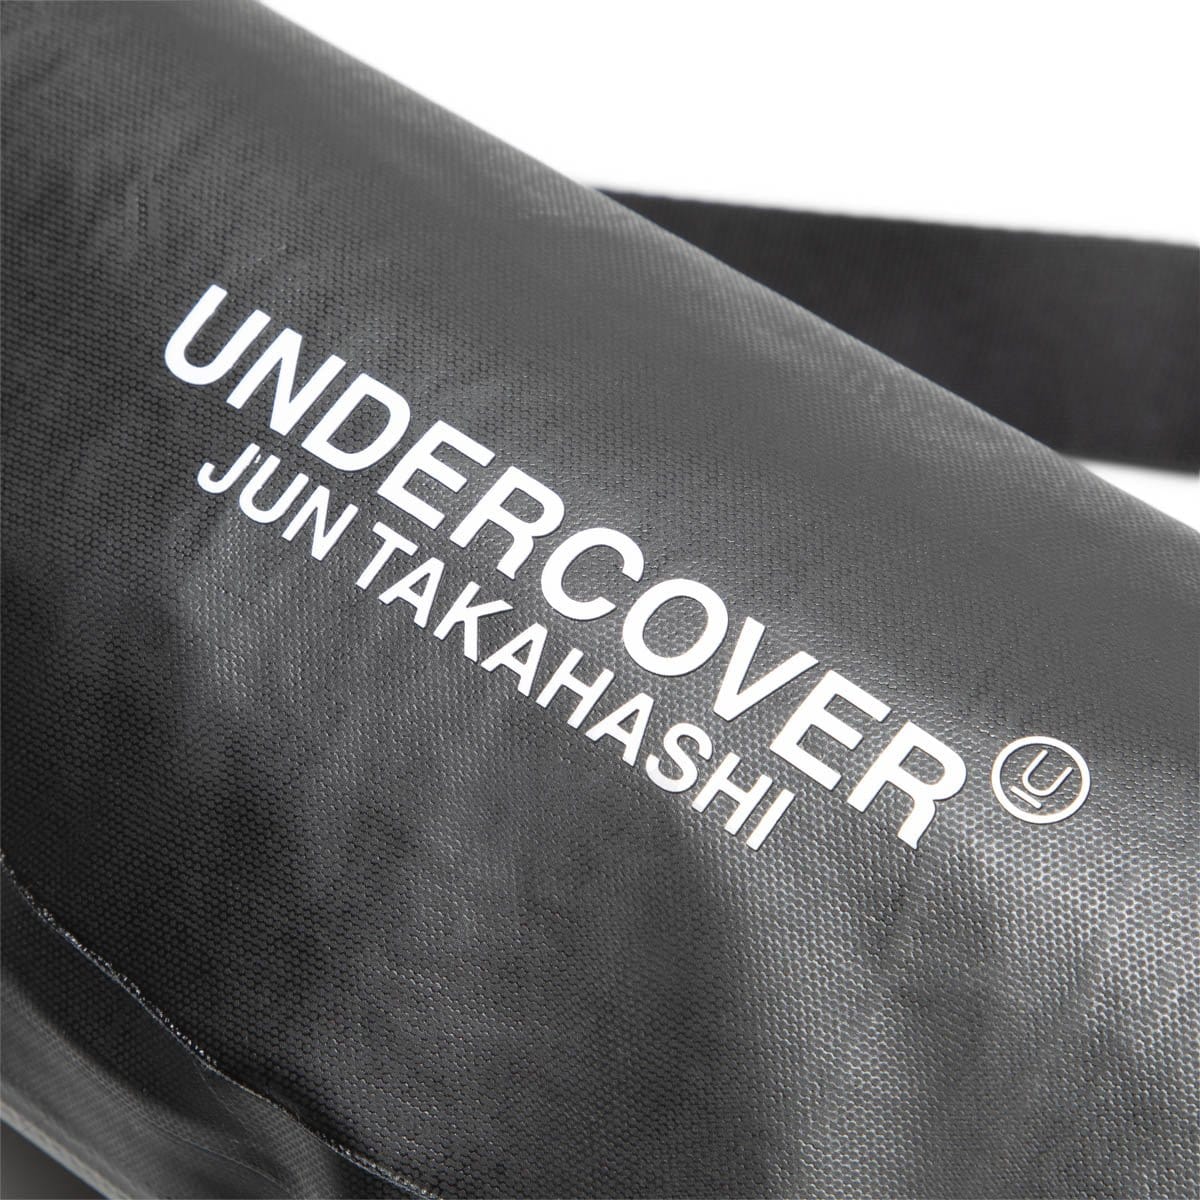 Undercover Bags & Accessories BLACK / O/S UCZ4P01 POUCH